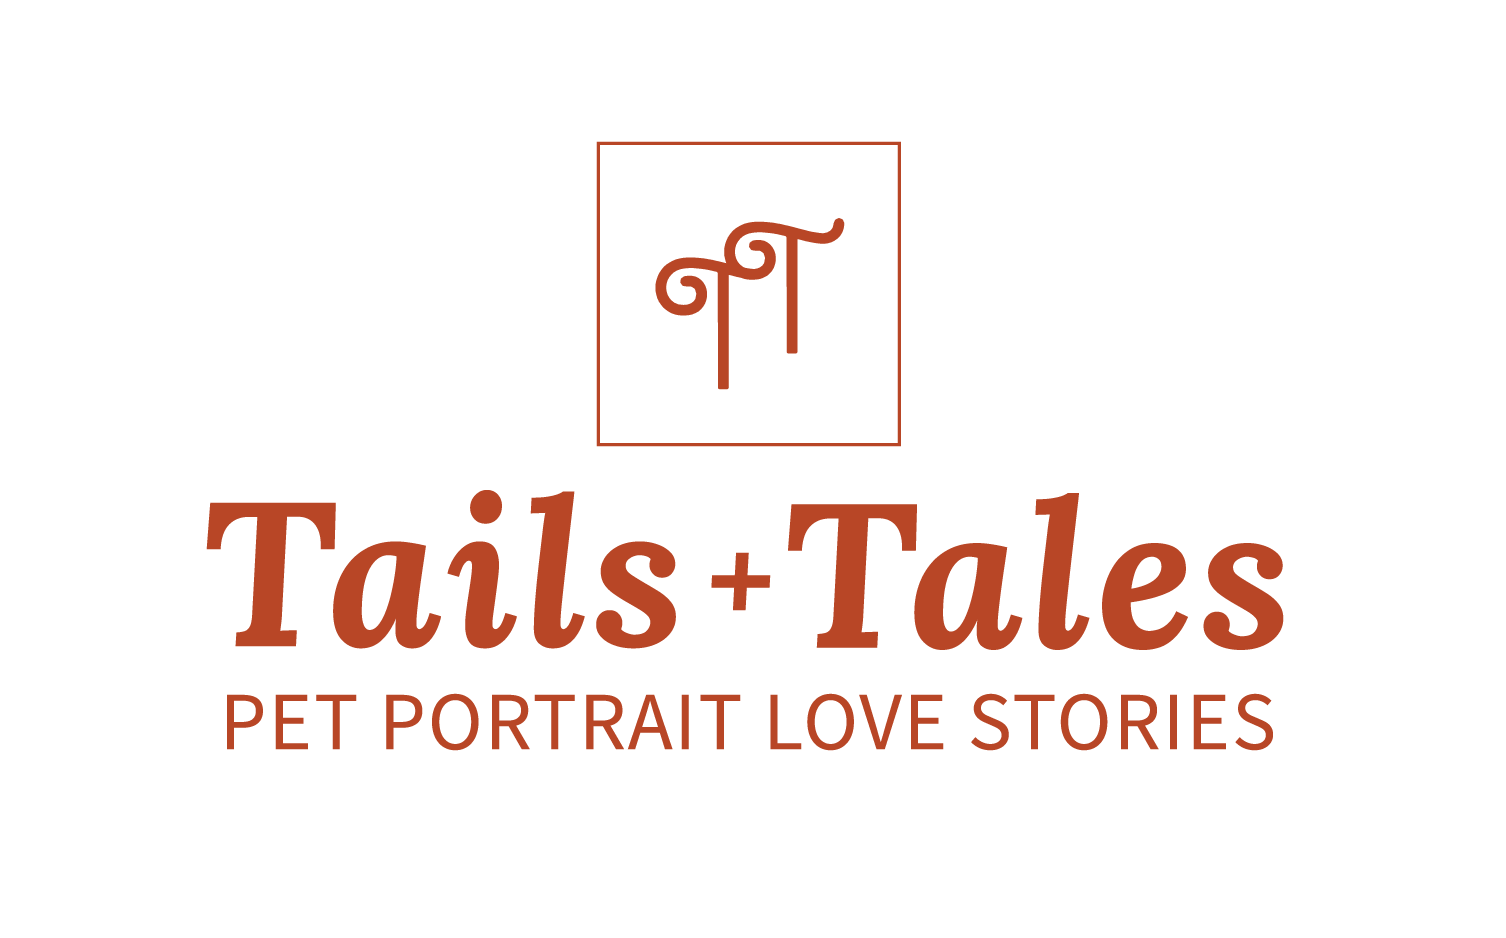 Tails + Tales